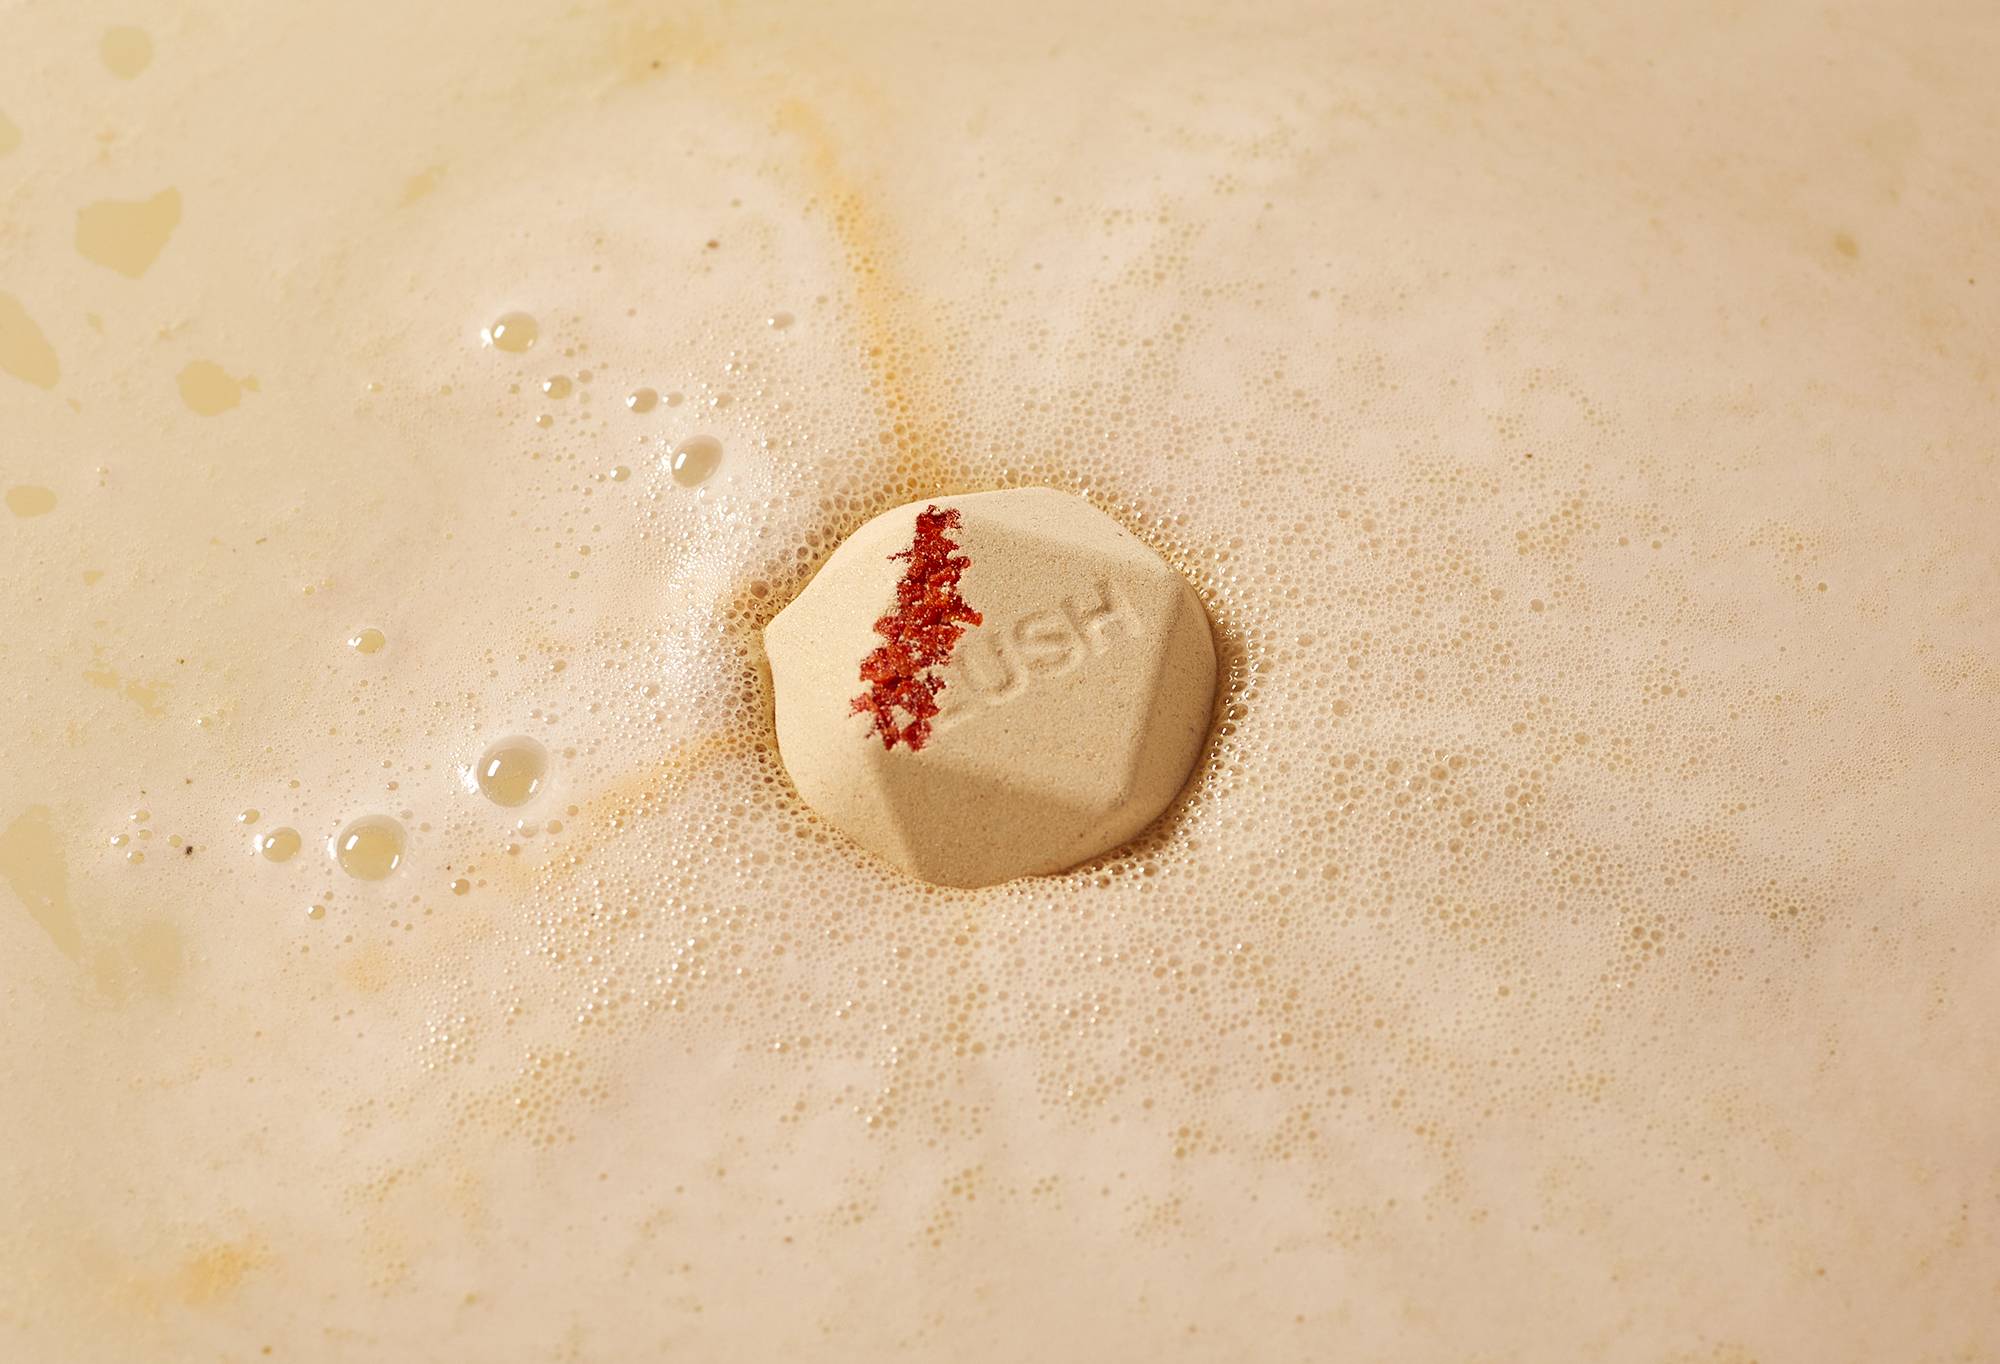 Hibana bath bomb sits on a sea of silky, creamy foam with red-coloured salt and "Lush" embossed on top.